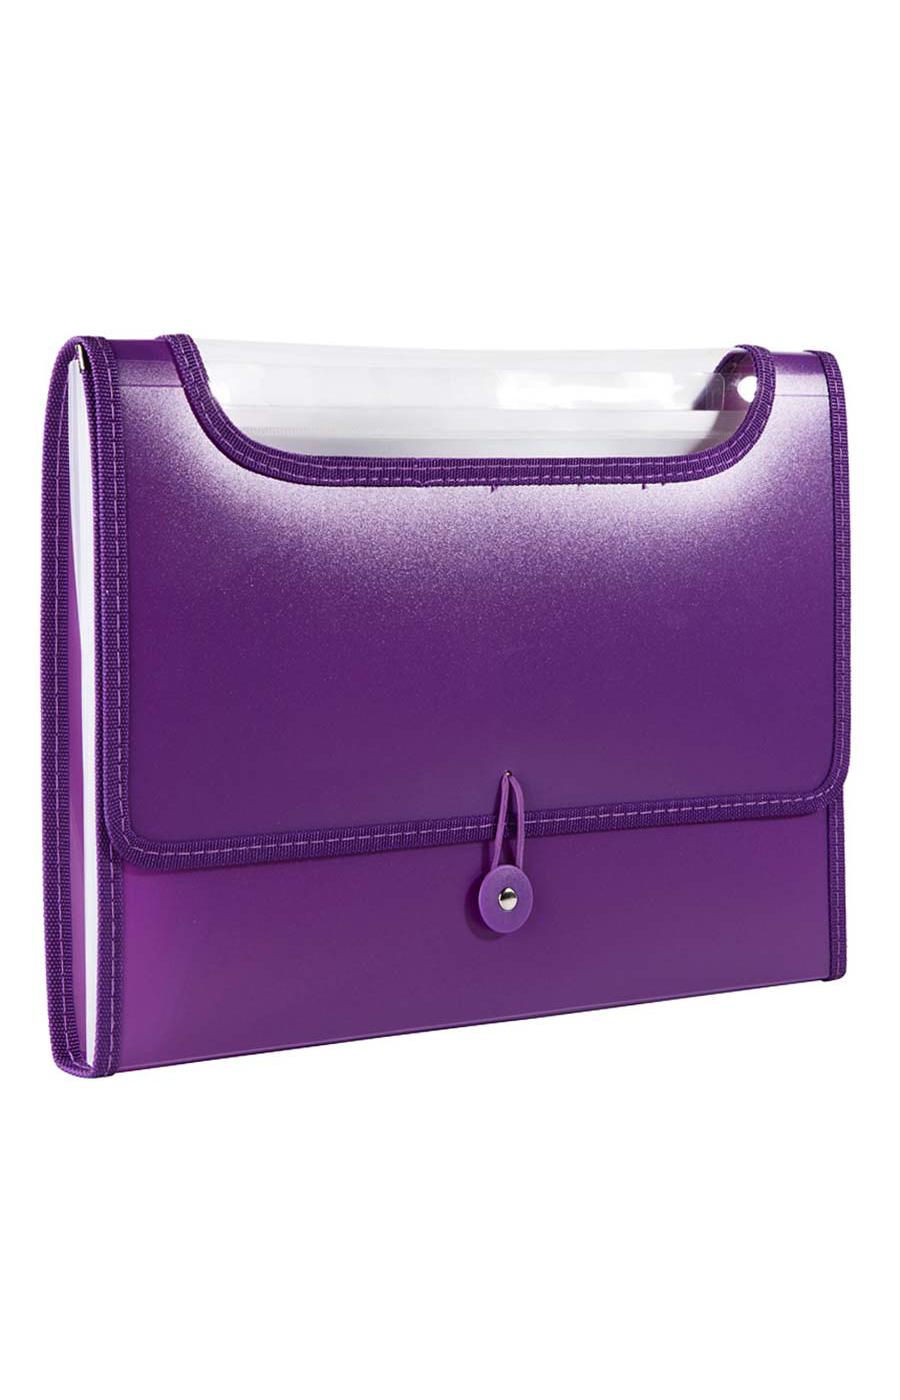 Filexec Products 12 Tab Expanding Poly File Organizer - Radiant Purple; image 1 of 2